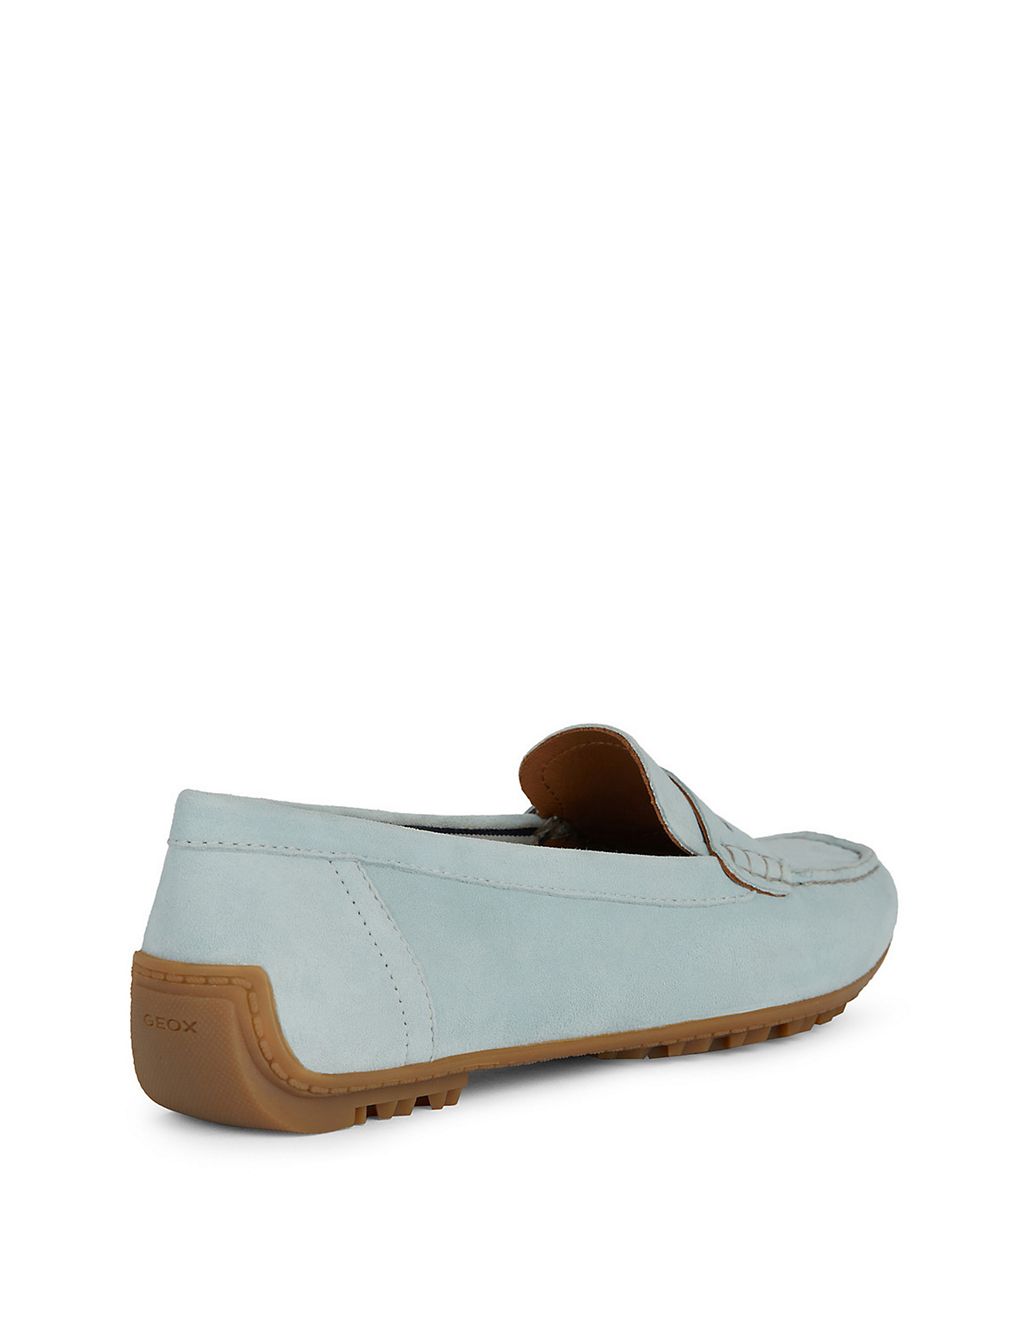 Suede Slip On Flat Loafers 4 of 6